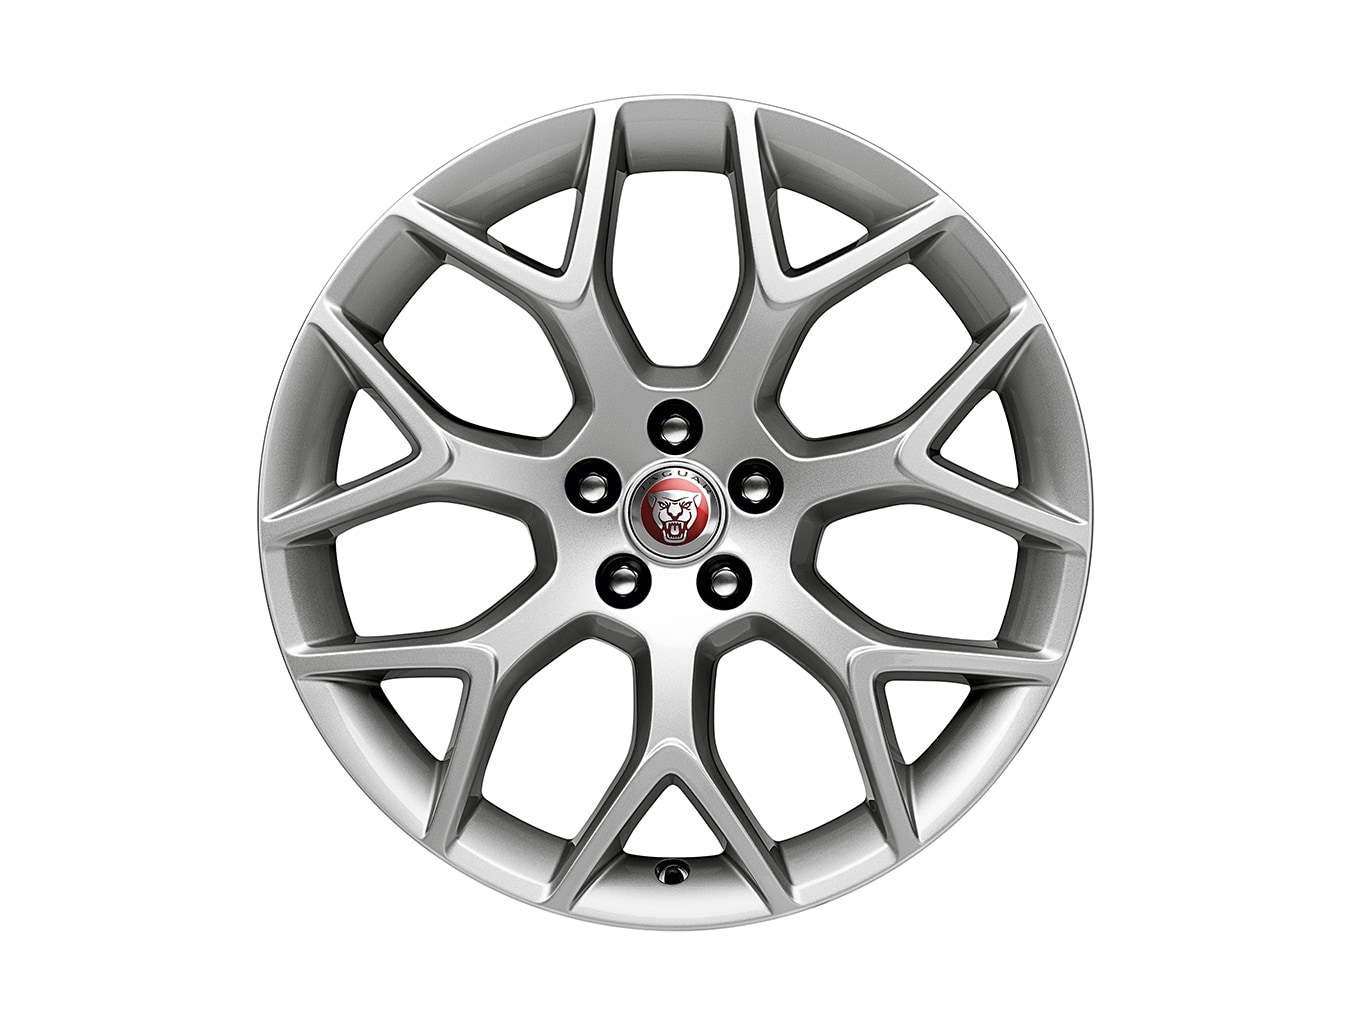 19" Style 7013, front